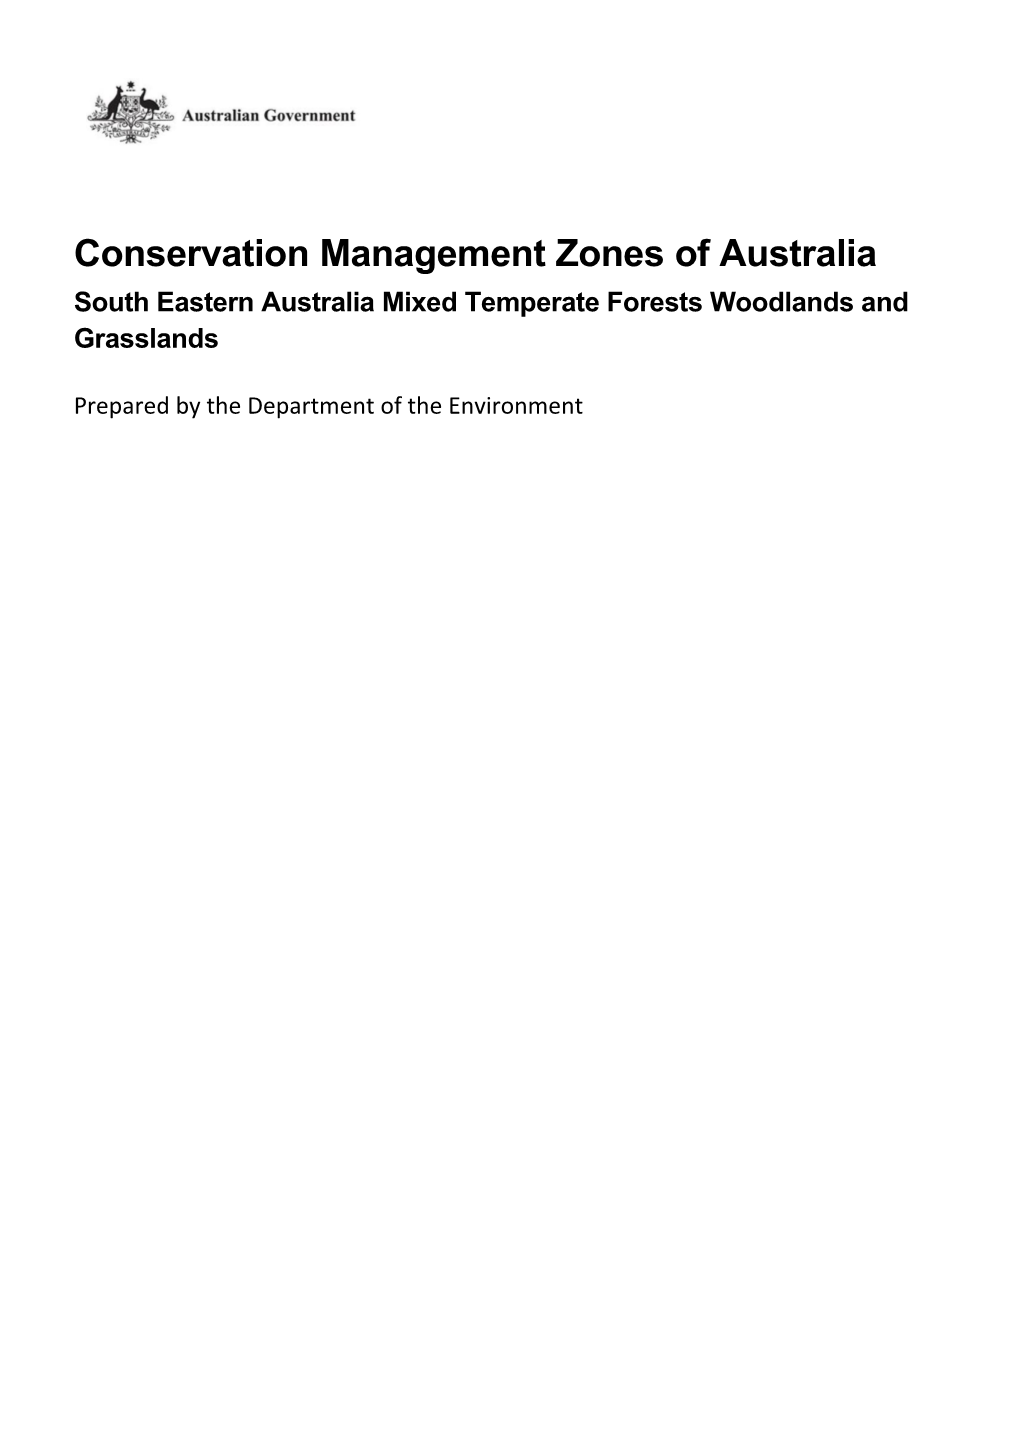 Conservation Management Zones of Australia - South Eastern Australia Mixed Temperate Forests